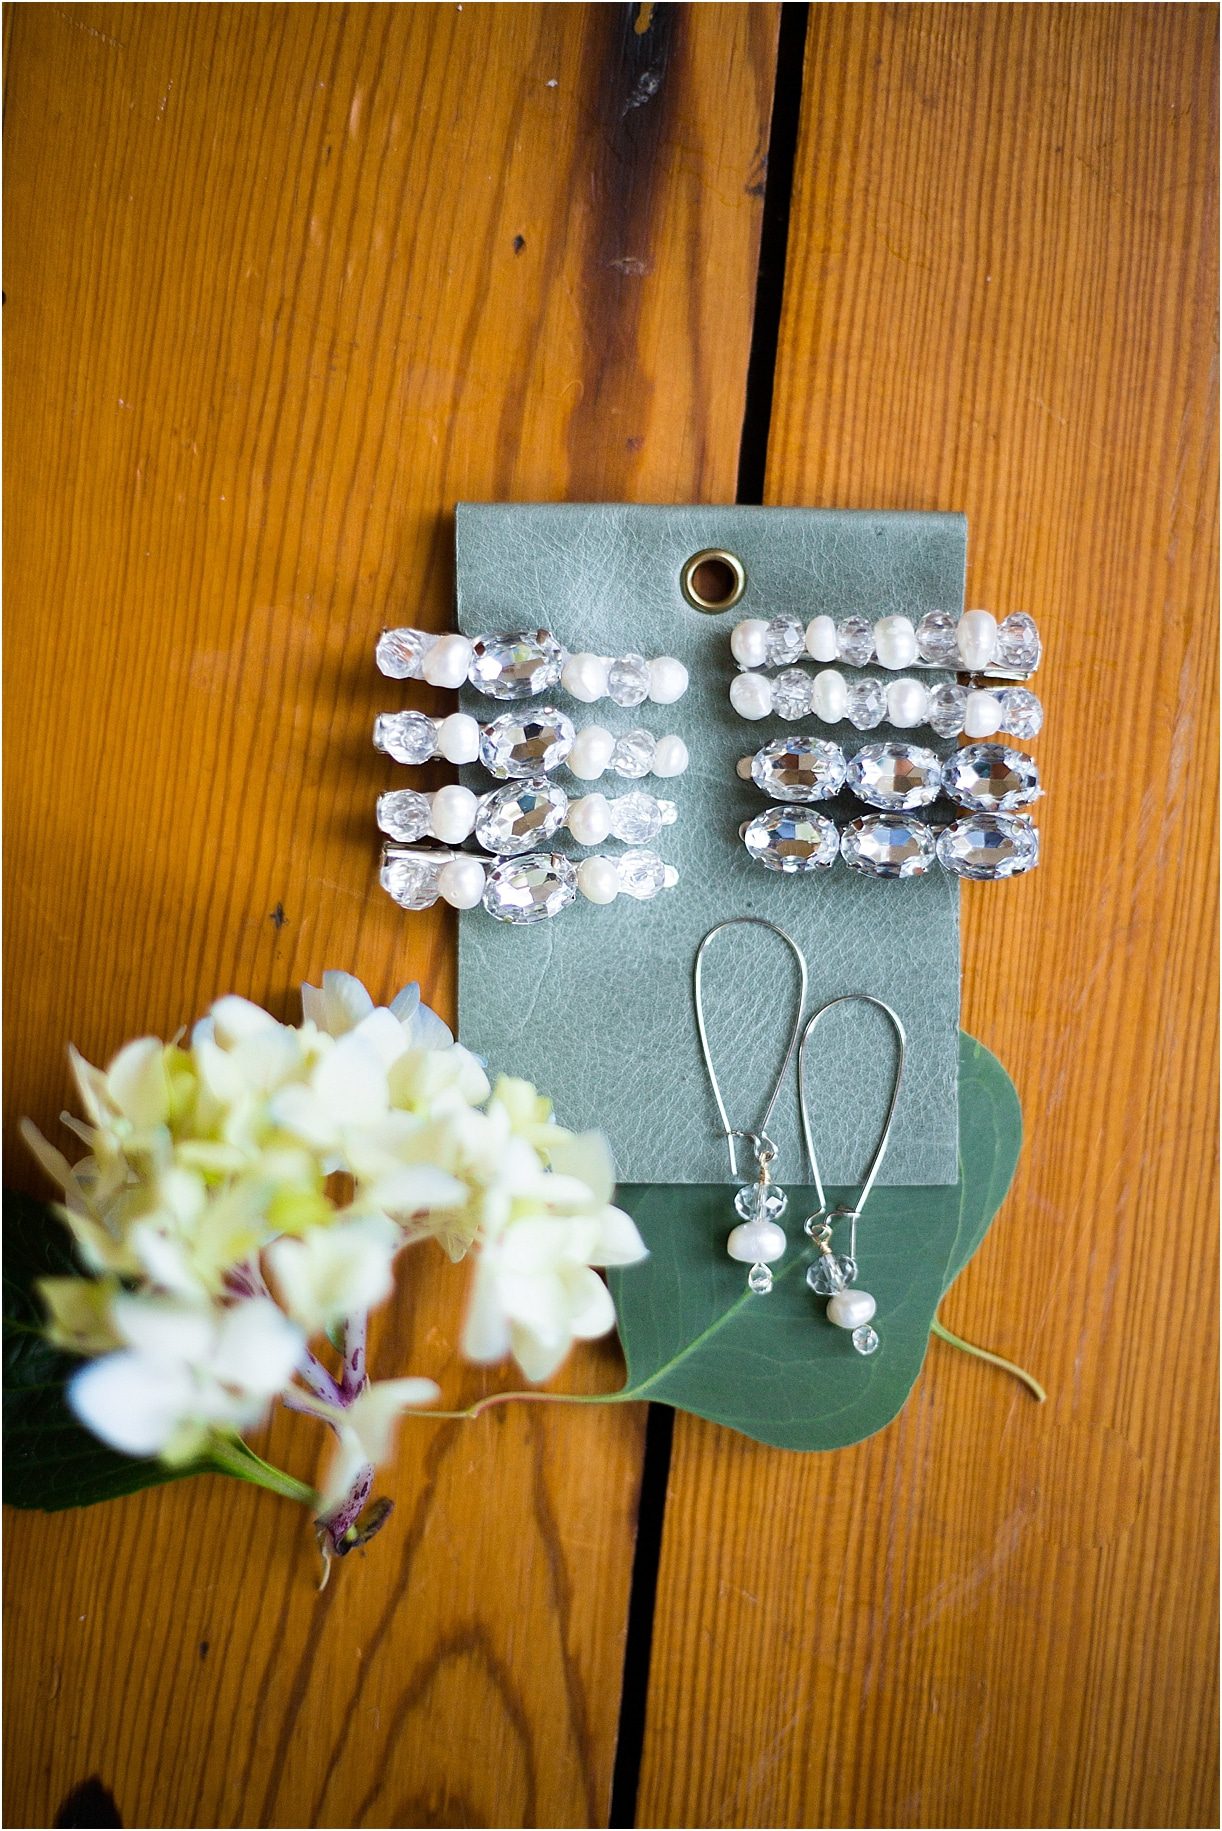 How to Make Earrings for Your Wedding Day | Hill City Bride Virginia Weddings Blog